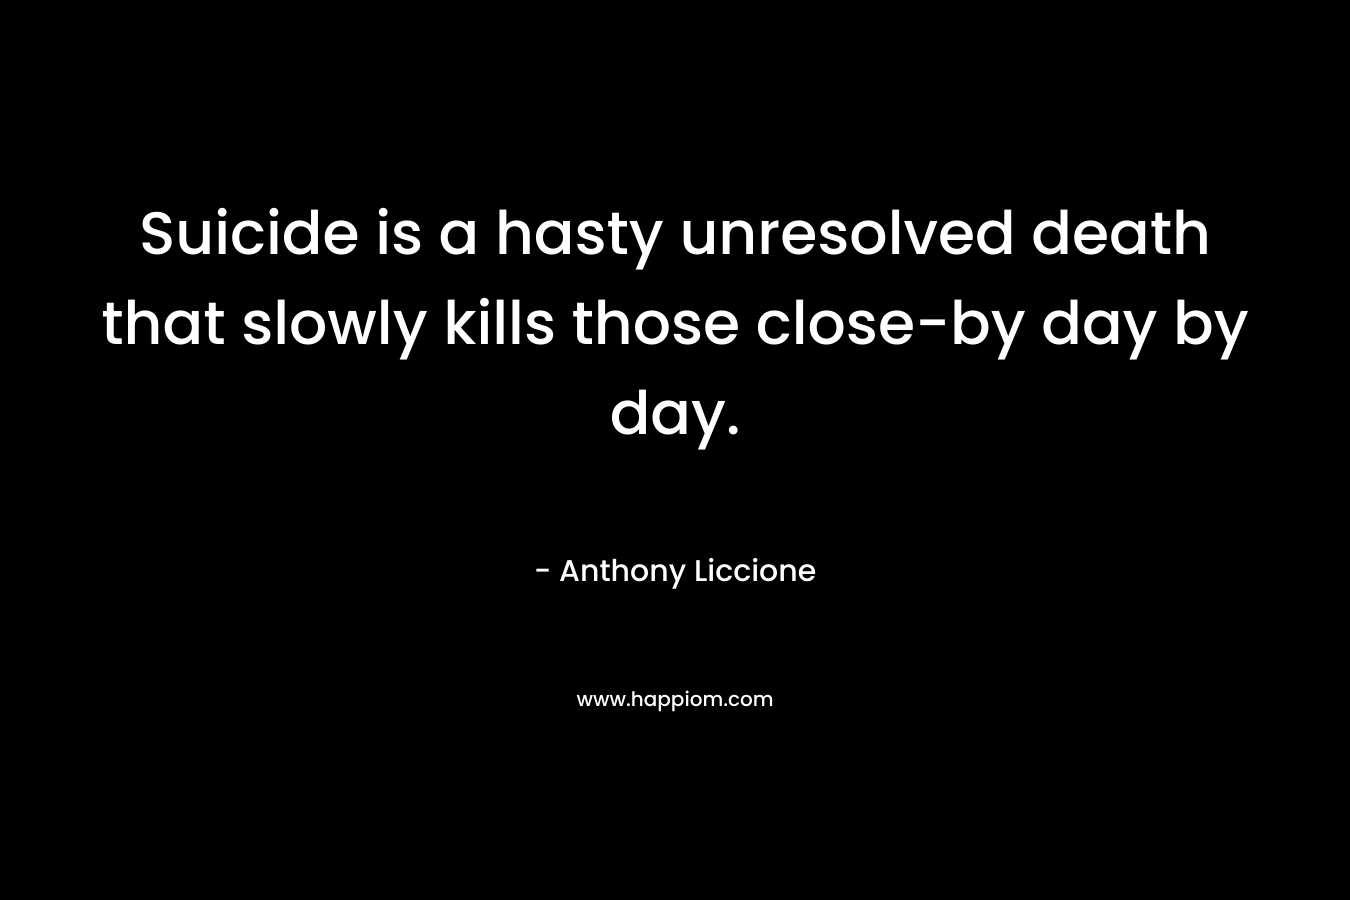 Suicide is a hasty unresolved death that slowly kills those close-by day by day.